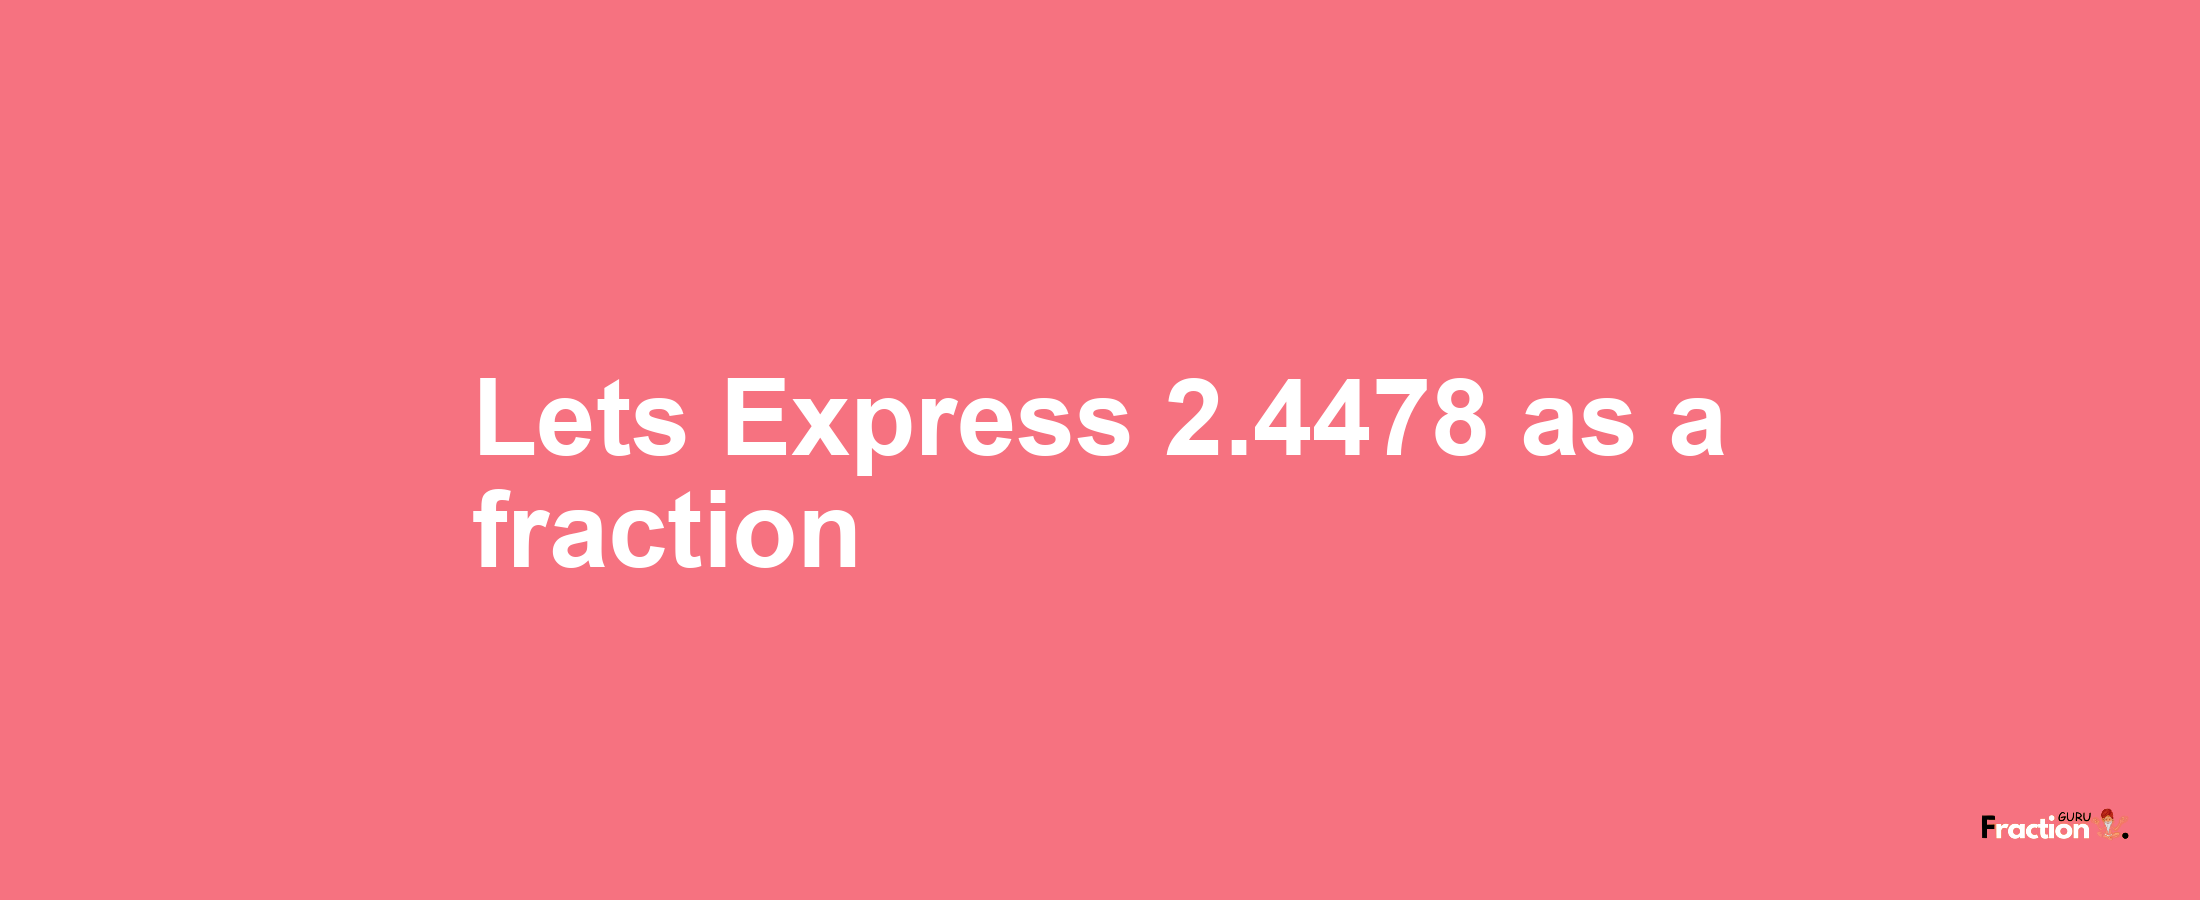 Lets Express 2.4478 as afraction